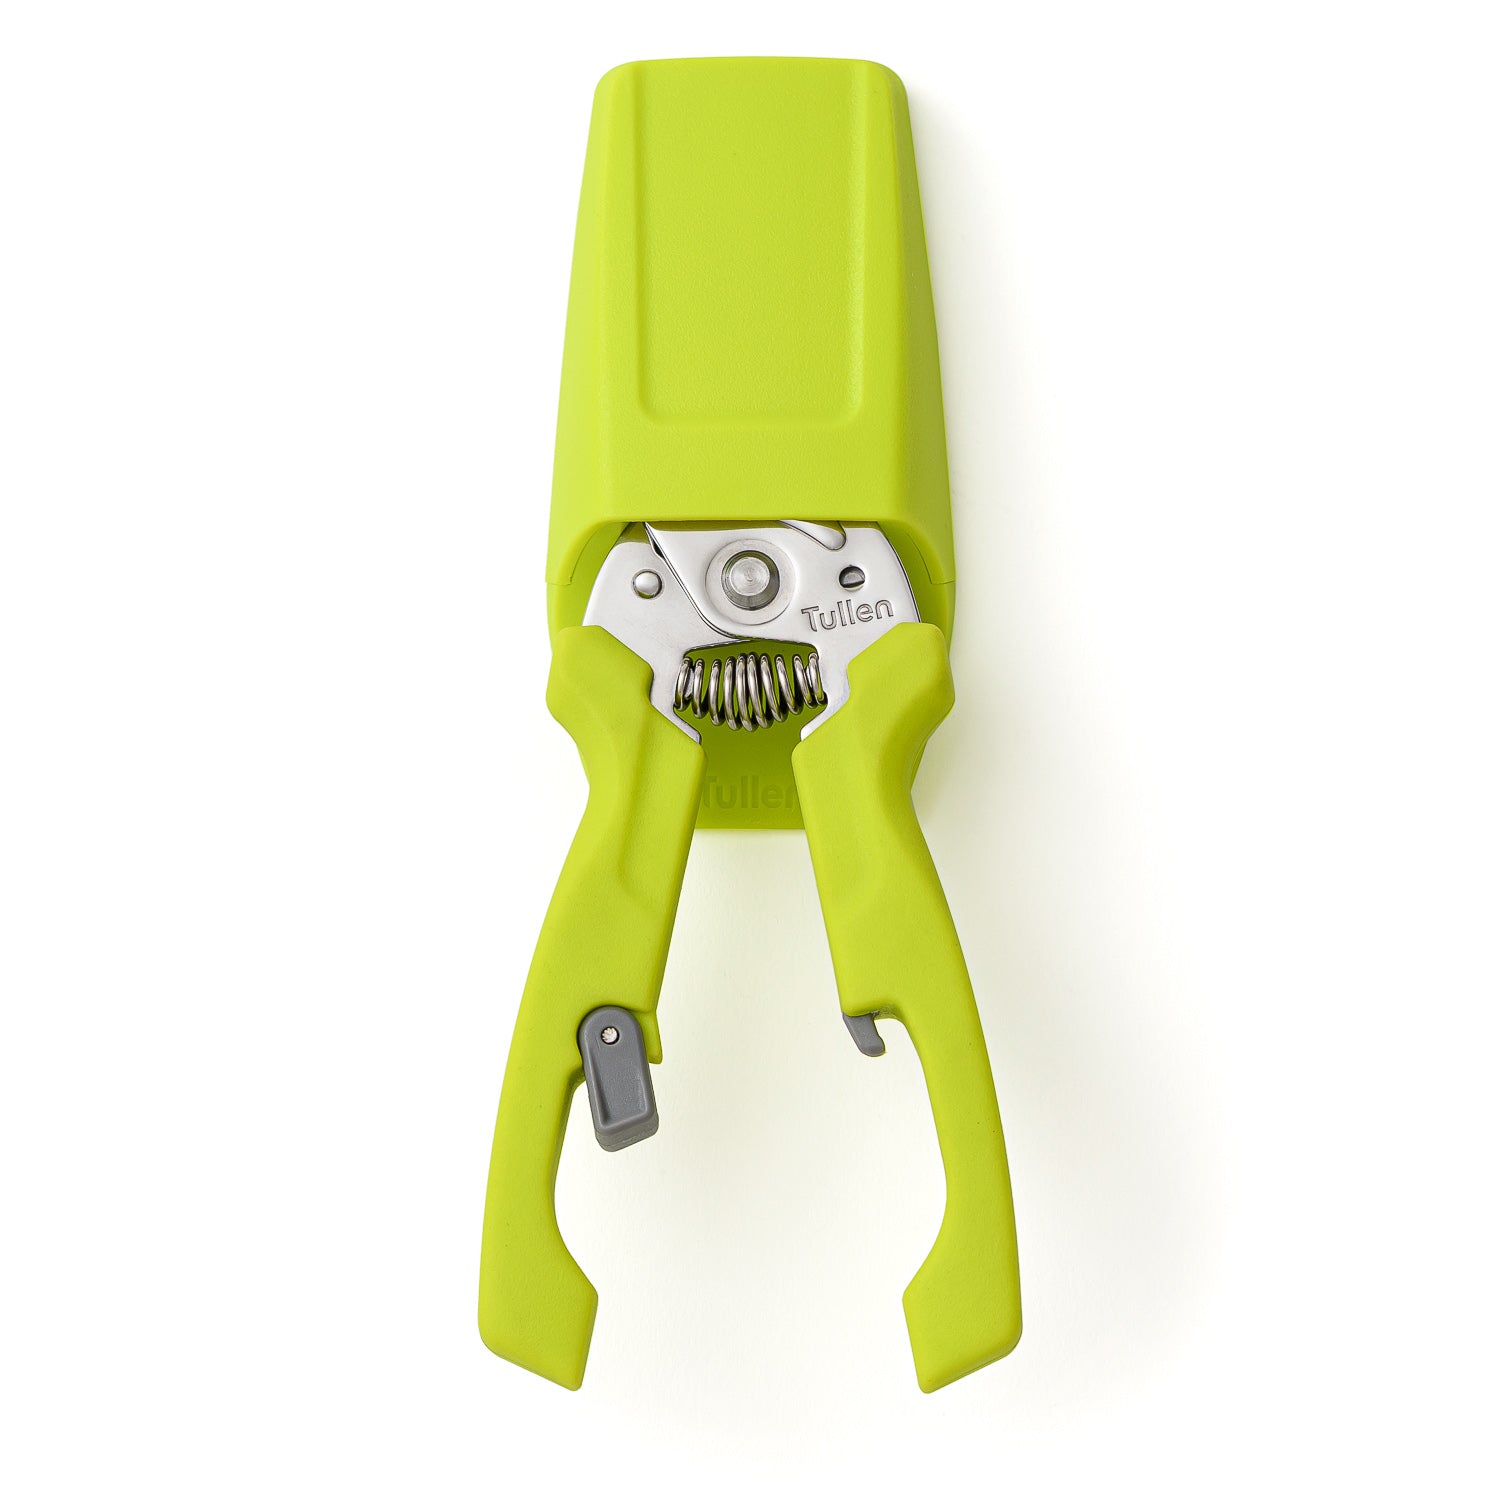 Tullen Snips - Green with Holder